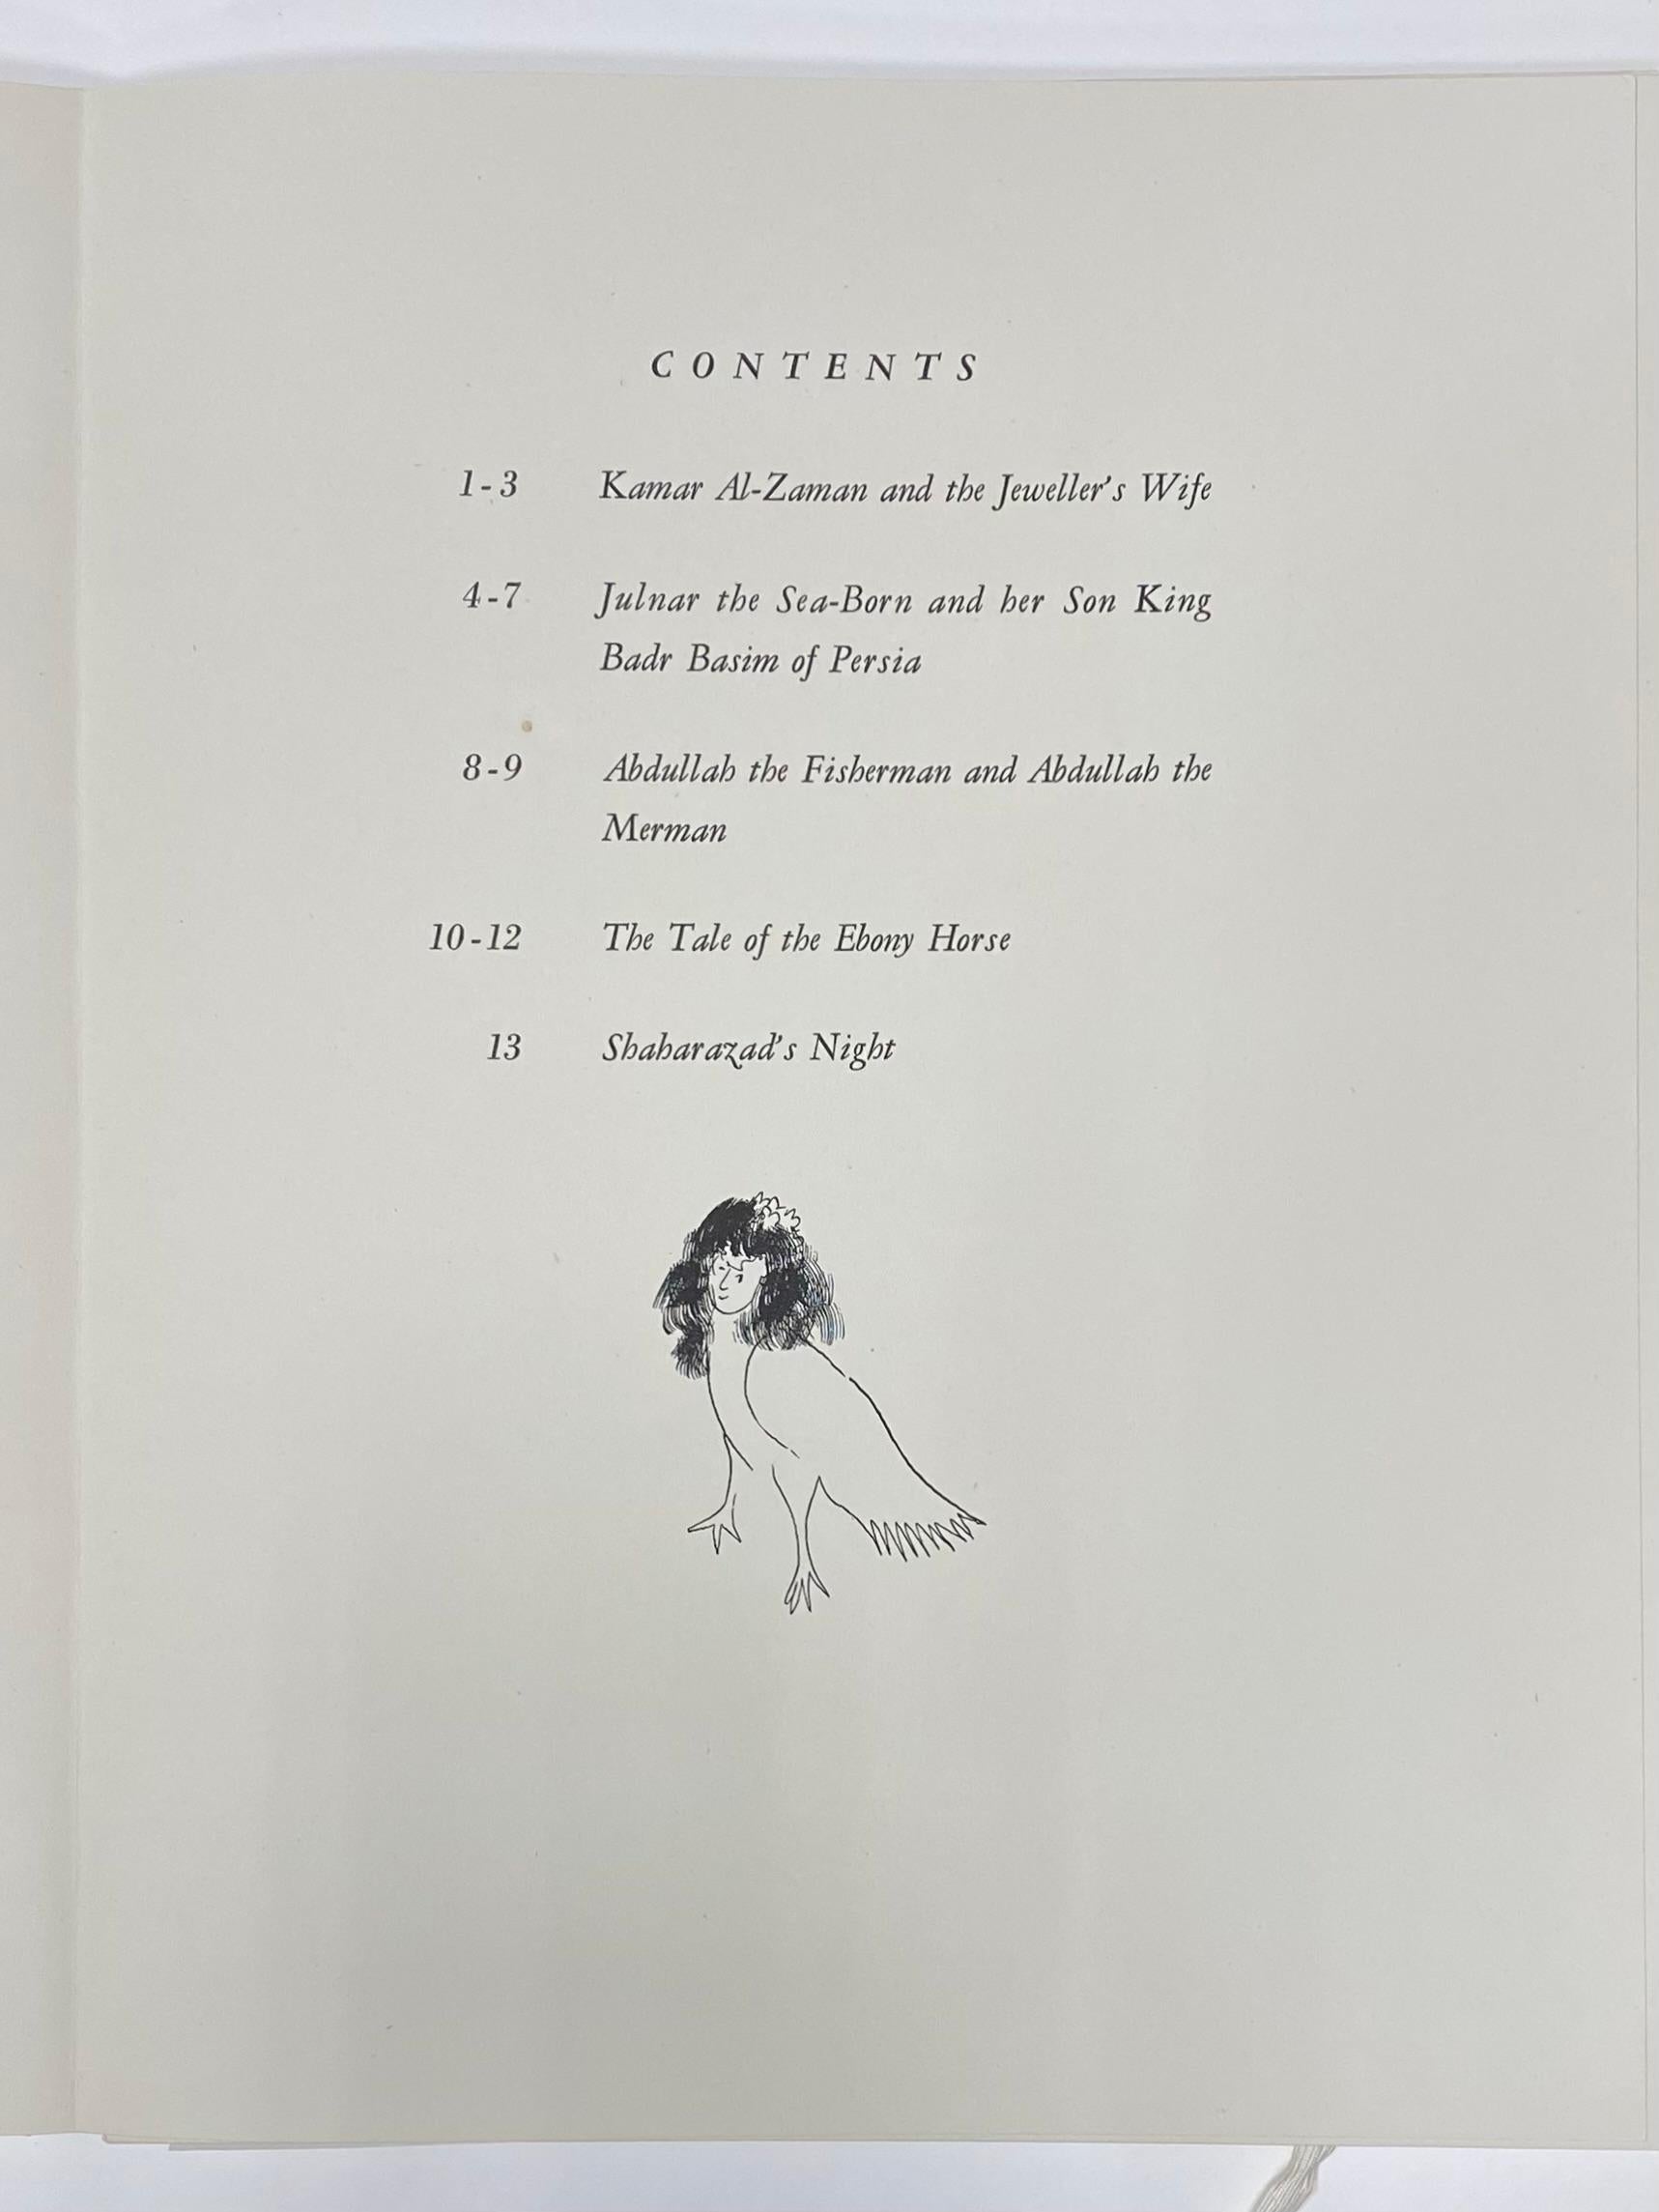 Marc Chagall (1887-1985)
FOUR TALES FROM THE ARABIAN NIGHTS (MOURLOT 36 - 47; CRAMER BOOKS 18)

The complete set of twelve lithographs printed in colors, 1948, each signed in pencil, inscribed with the plate number and numbered 58/90 (there was also